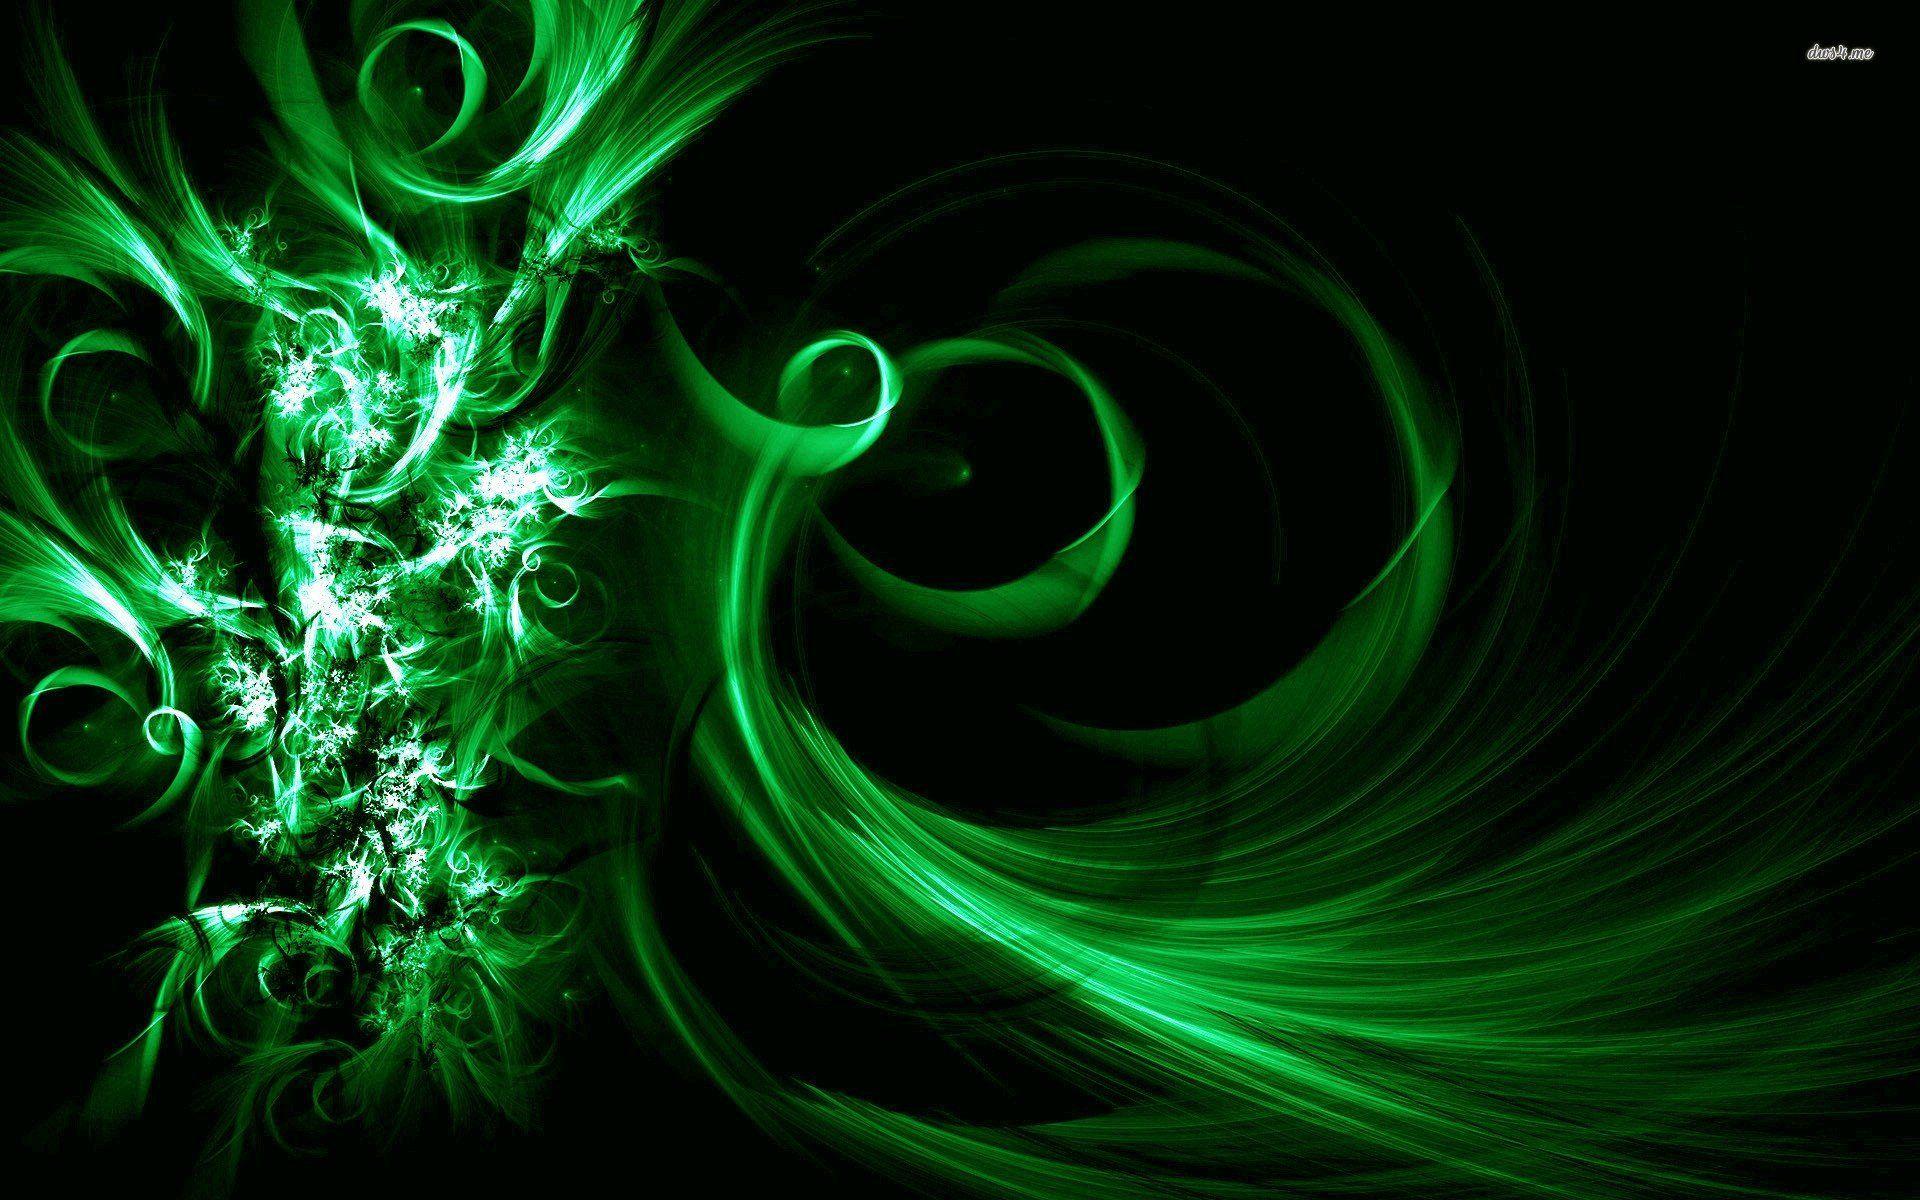 Neon Green Dragon Wallpapers - Top Free Neon Green Dragon Backgrounds ...